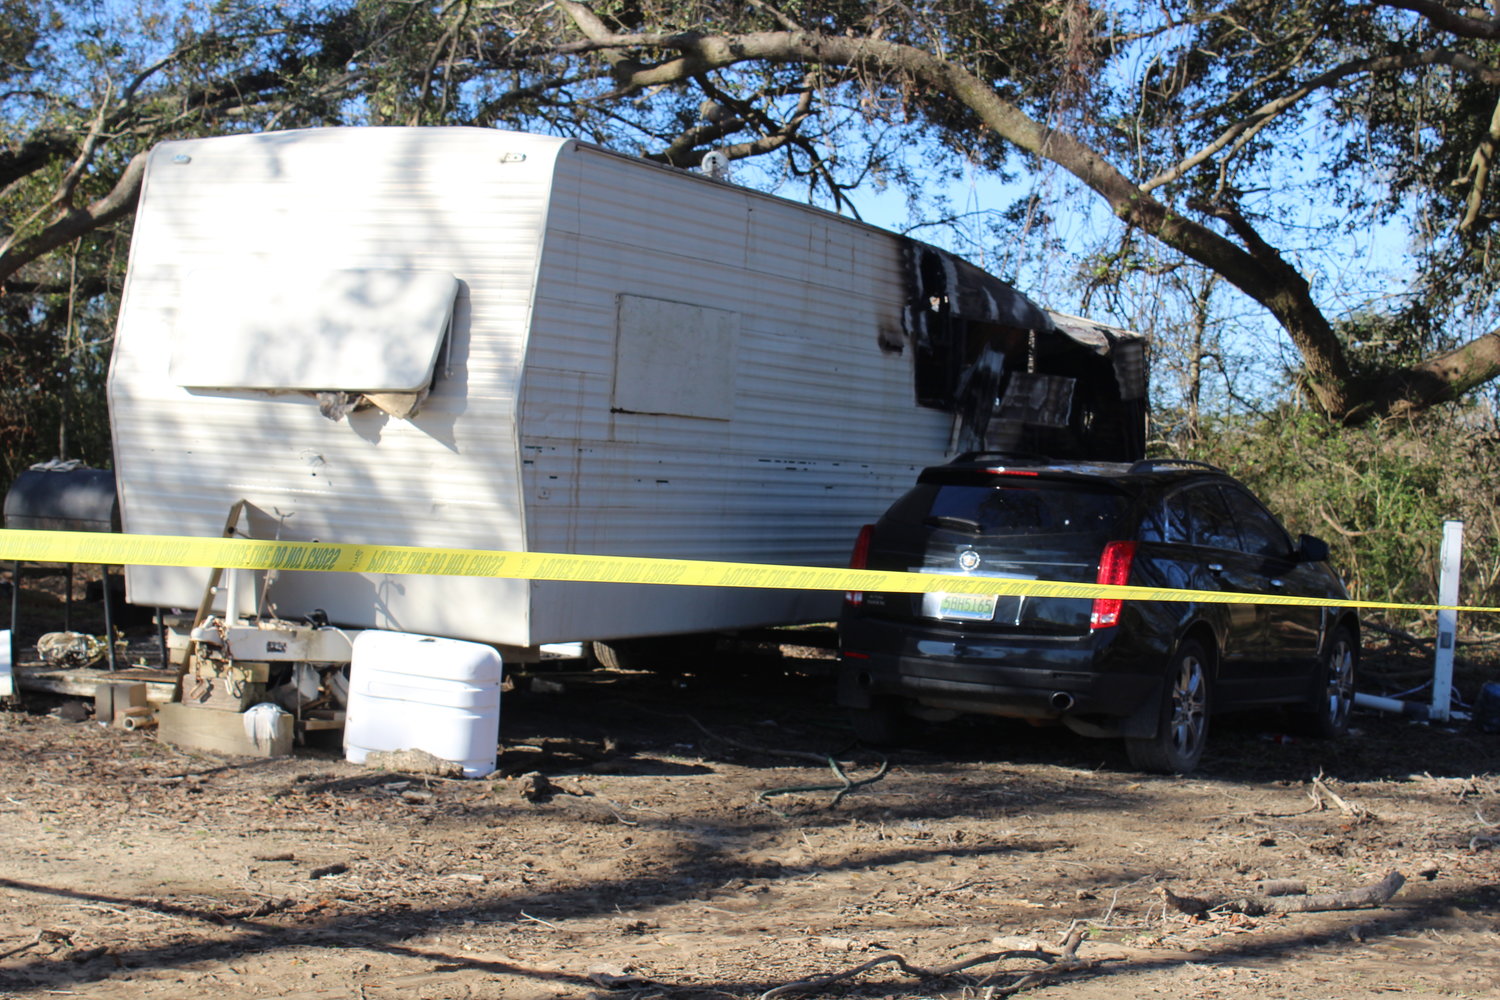 Fire destroyed this RV in the early morning hours Monday, Jan. 4 at Sandy Toes RV Park, claiming the life of 62-year-old Steven Dollhofer.